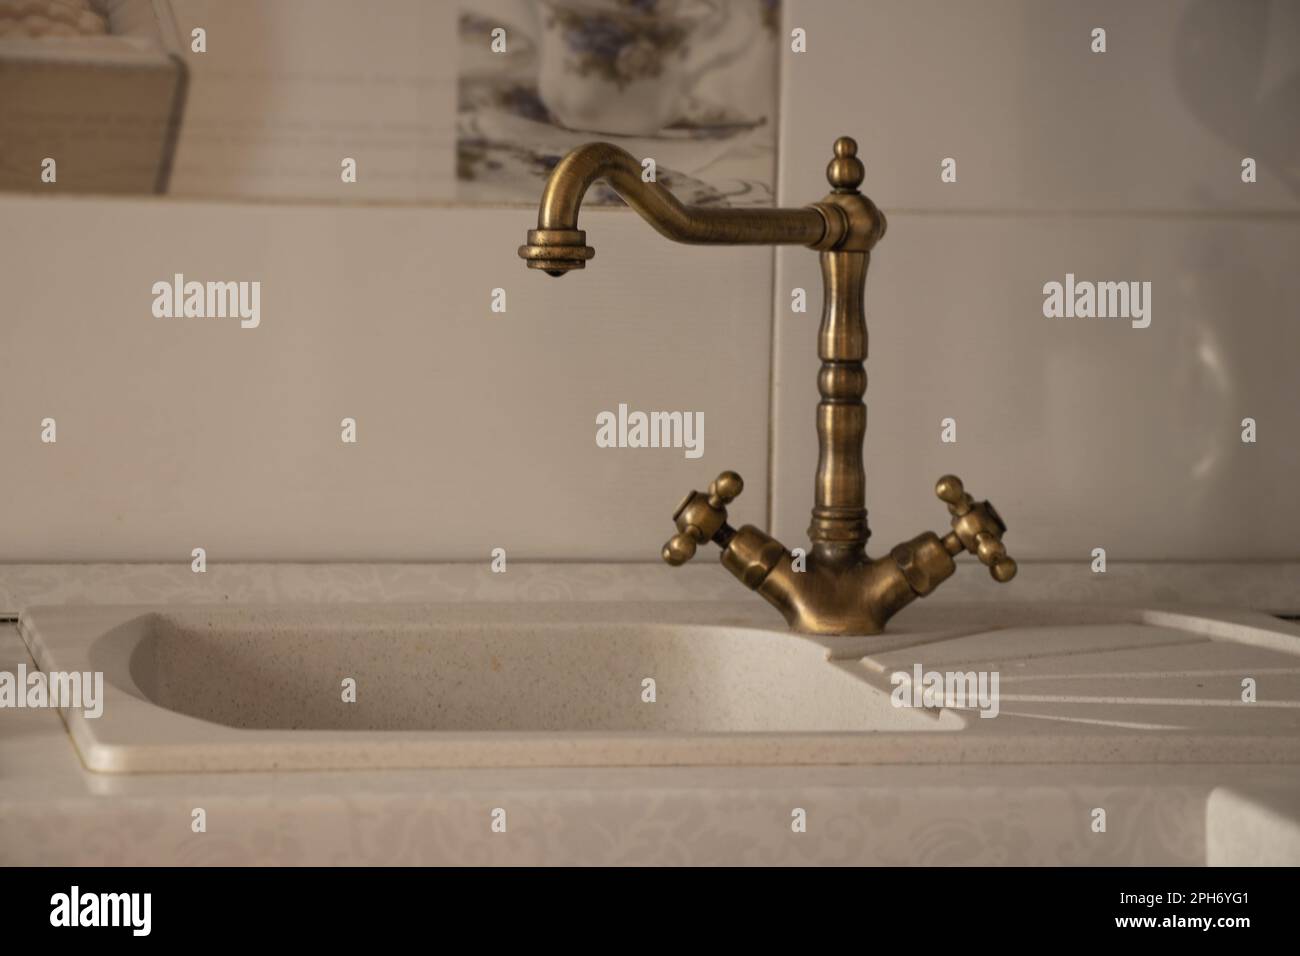 kitchen faucet on the kitchen in a retro style on the background of white tiles, kitchen sink Stock Photo